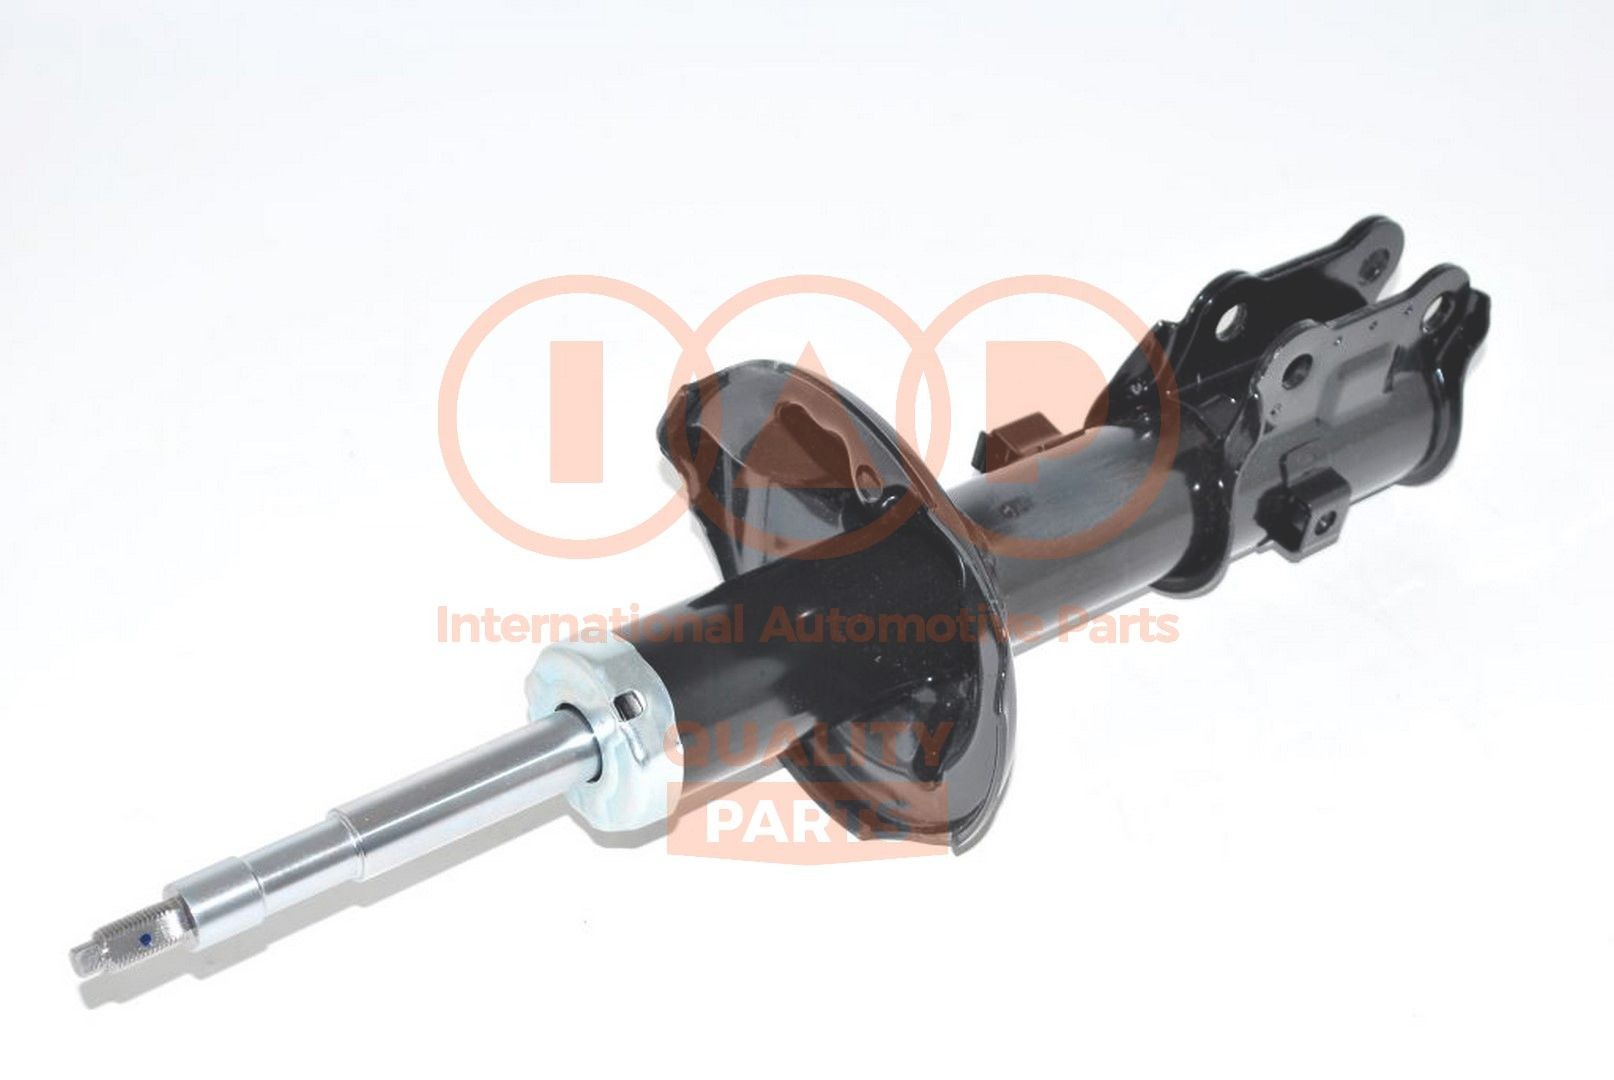 IAP QUALITY PARTS 504-07096 Shock absorber 54650-02410